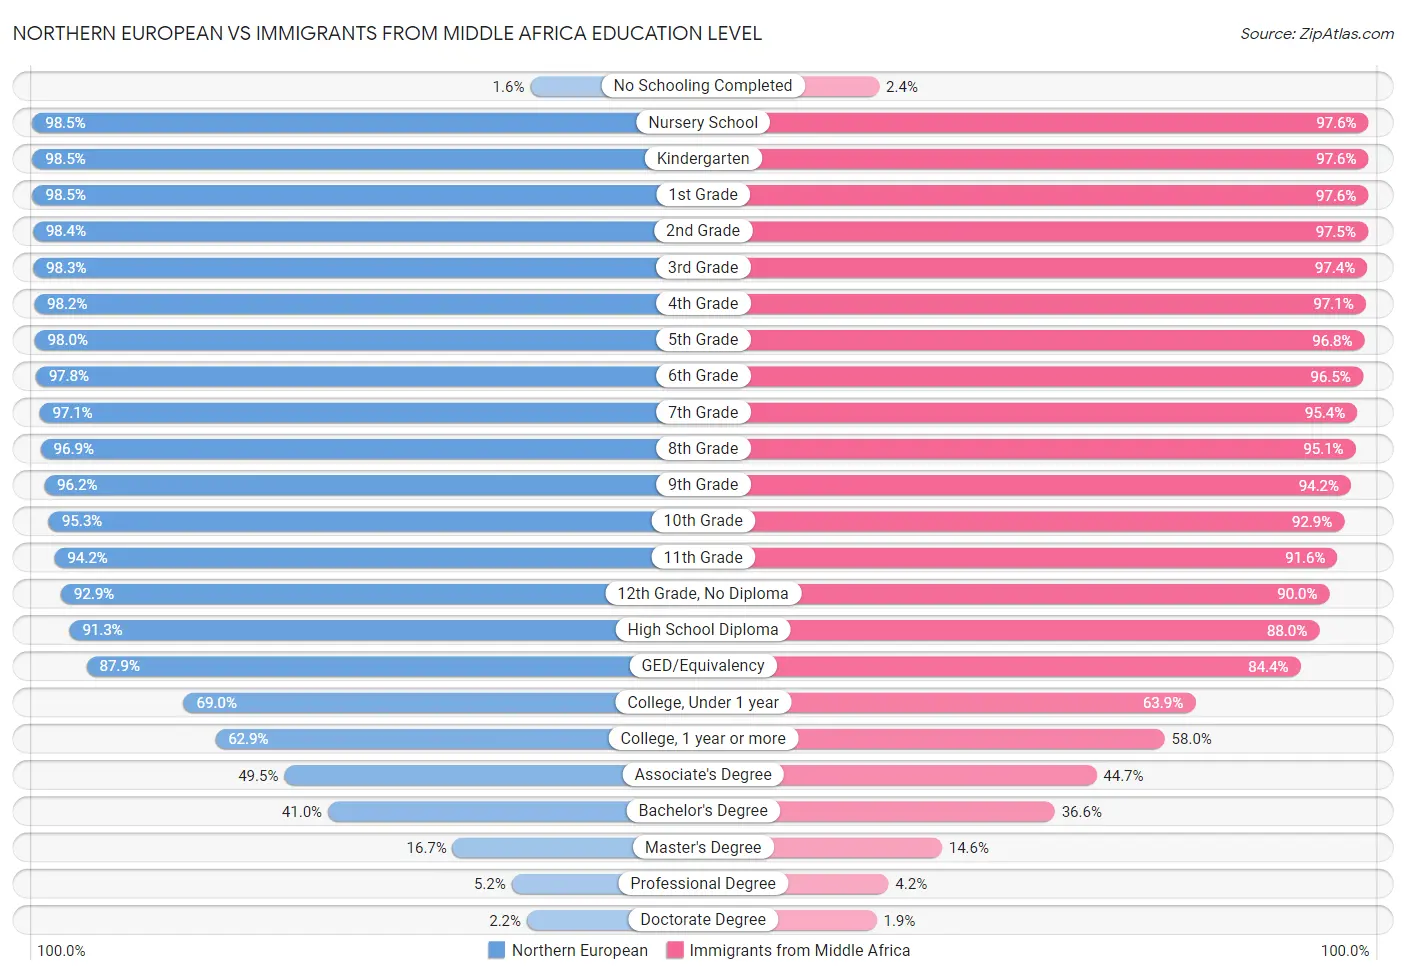 Northern European vs Immigrants from Middle Africa Education Level